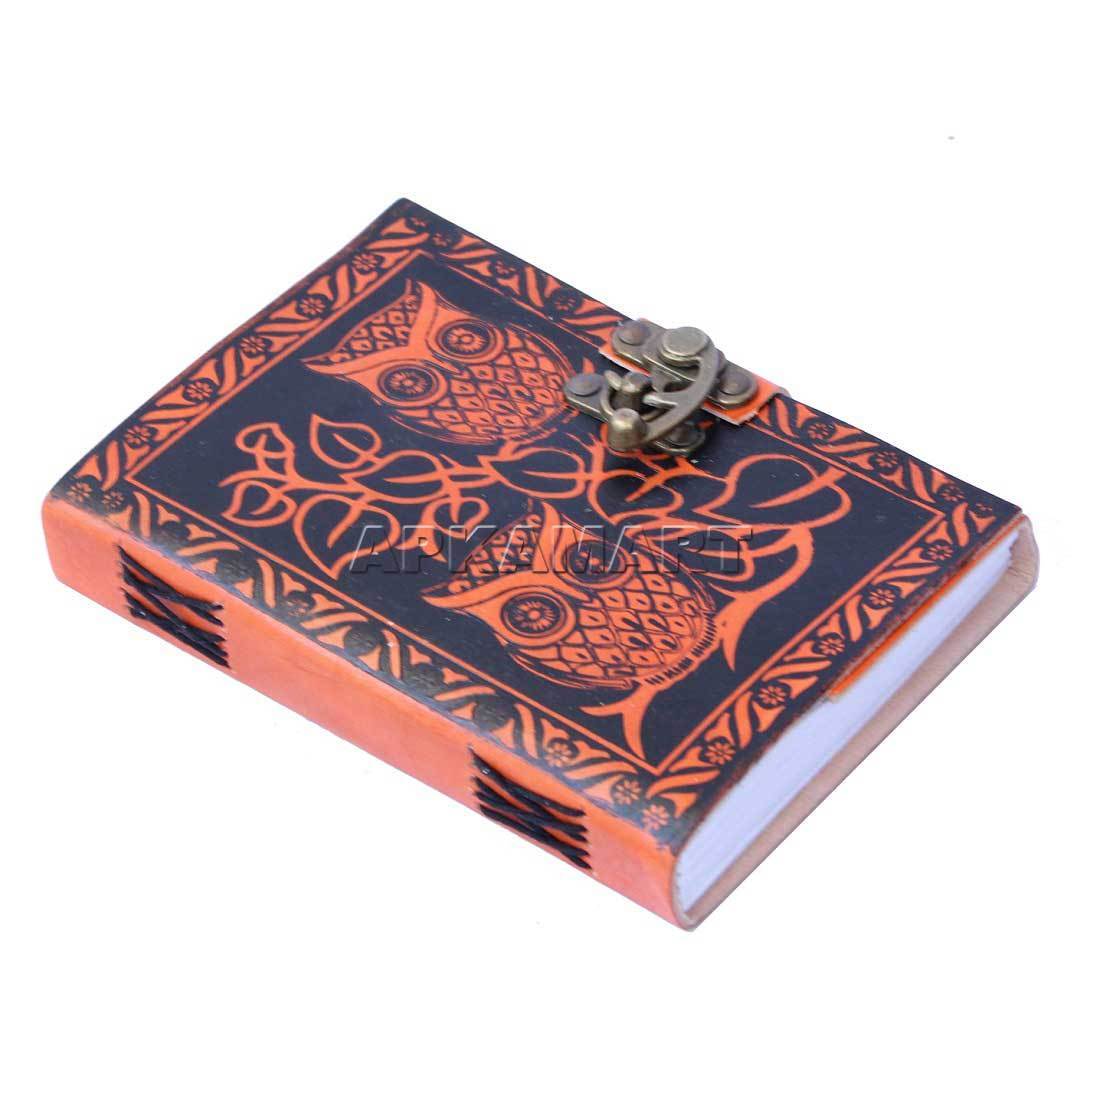 Executive Diary | Planner Diary - For Office work & Gifts - 7 inch - ApkaMart